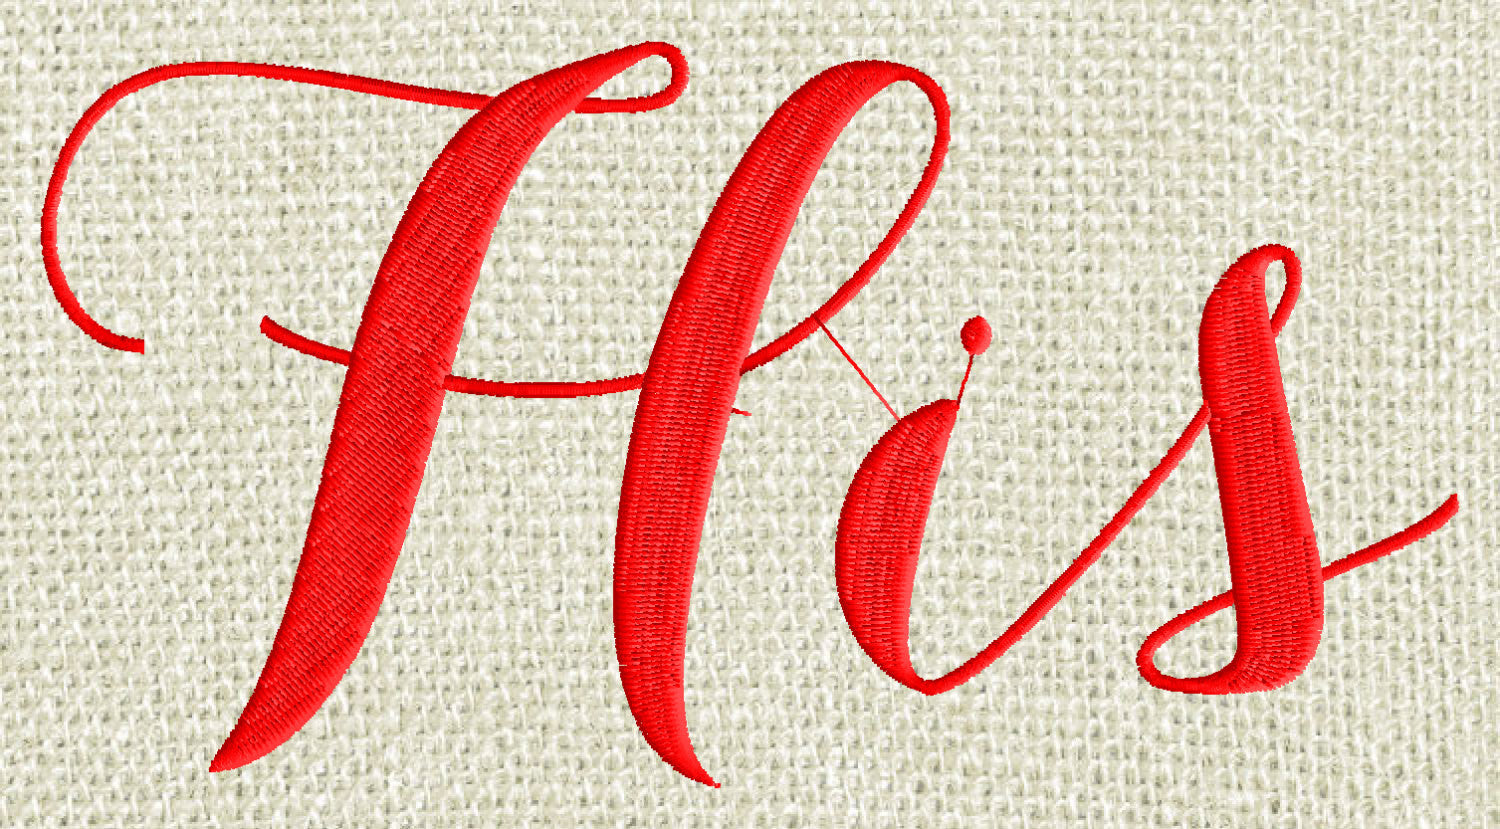 Wedding "His" and "Hers" EMBROIDERY DESIGN FILE - Instant download